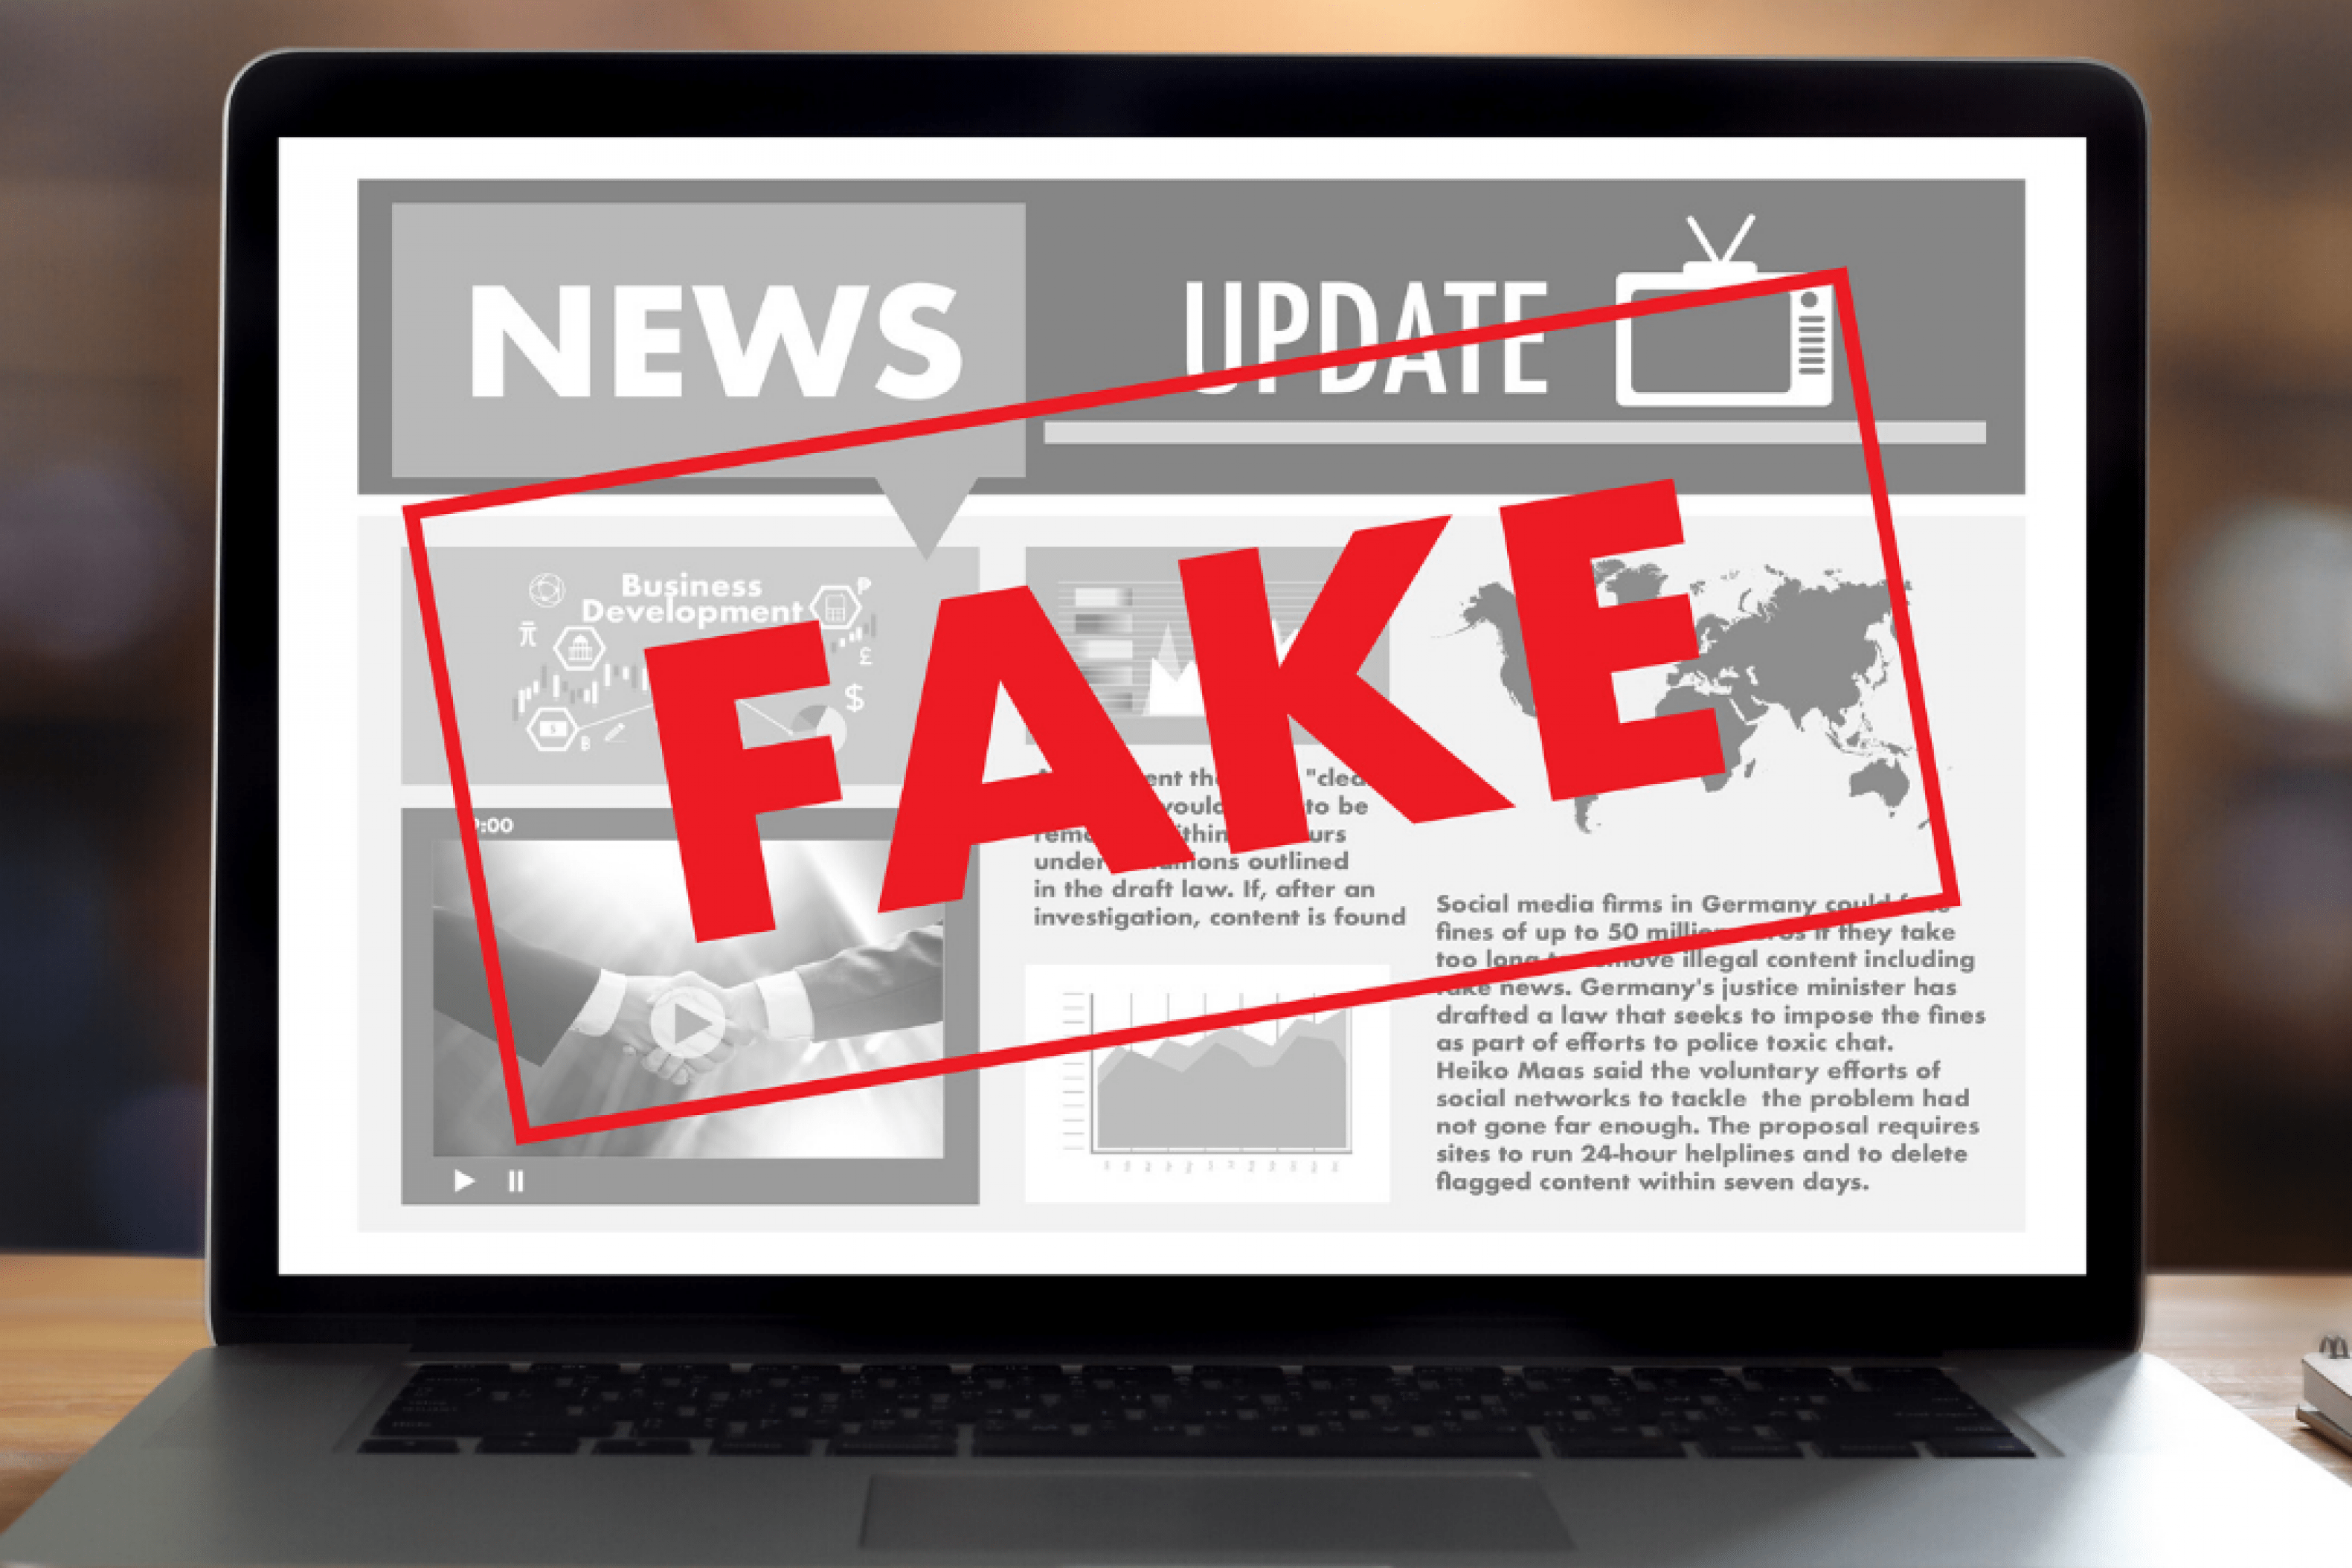 Common Practices and trends  - fake news - News Update um Business Develop Fake ons outlined in the draft law. Walter an Investigation, content is found Social media in urma fines of up to 5 ray to teen illegal content induding ws. Gamany's just minister 